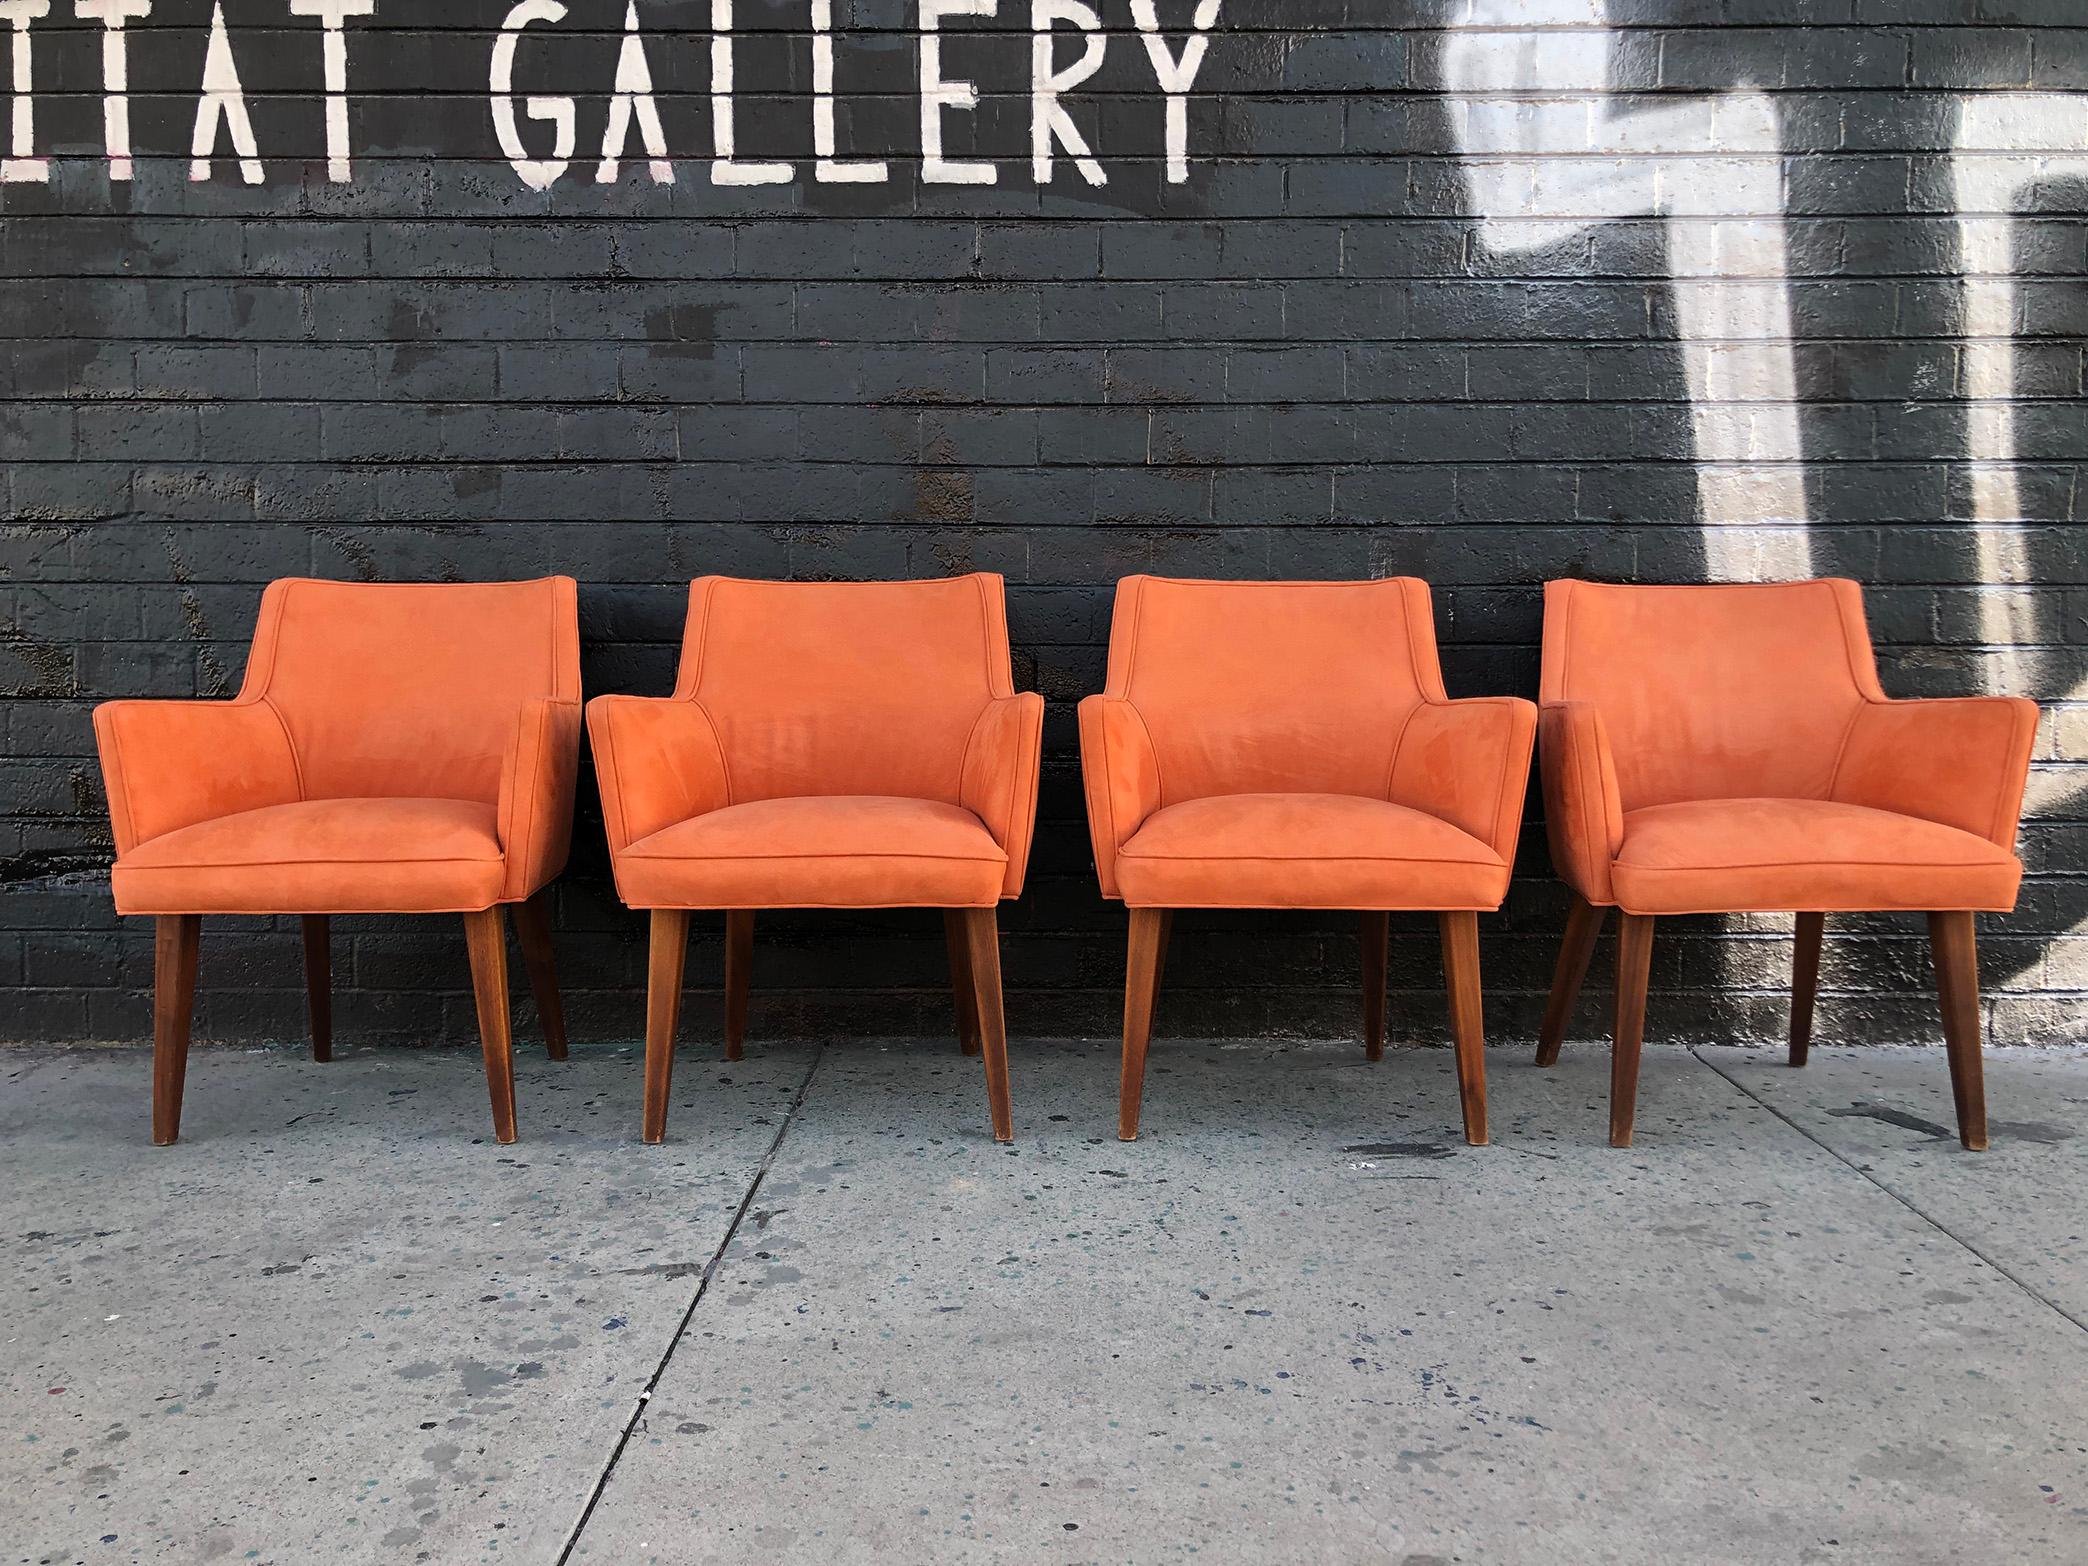 Late 20th Century Set of 4 Mid-Century Modern Dining Chairs